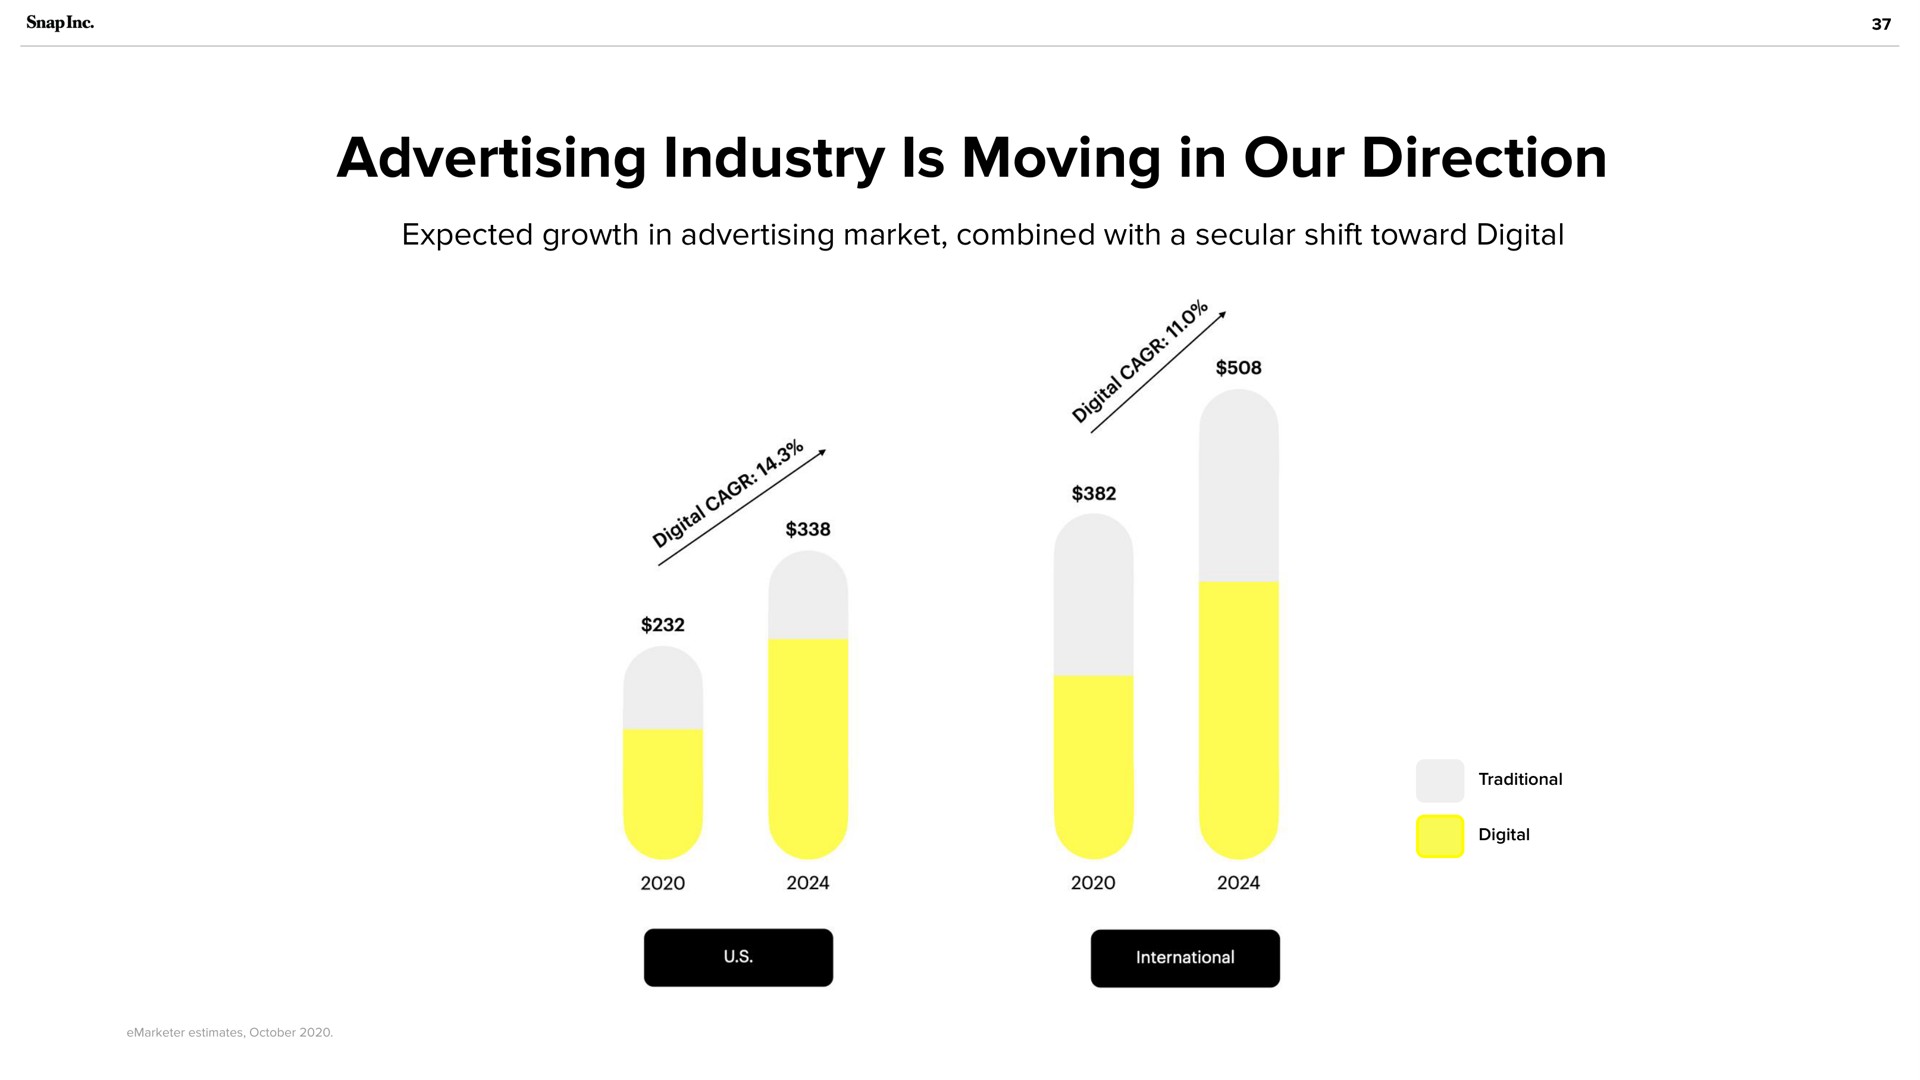 advertising industry is moving in our direction | Snap Inc